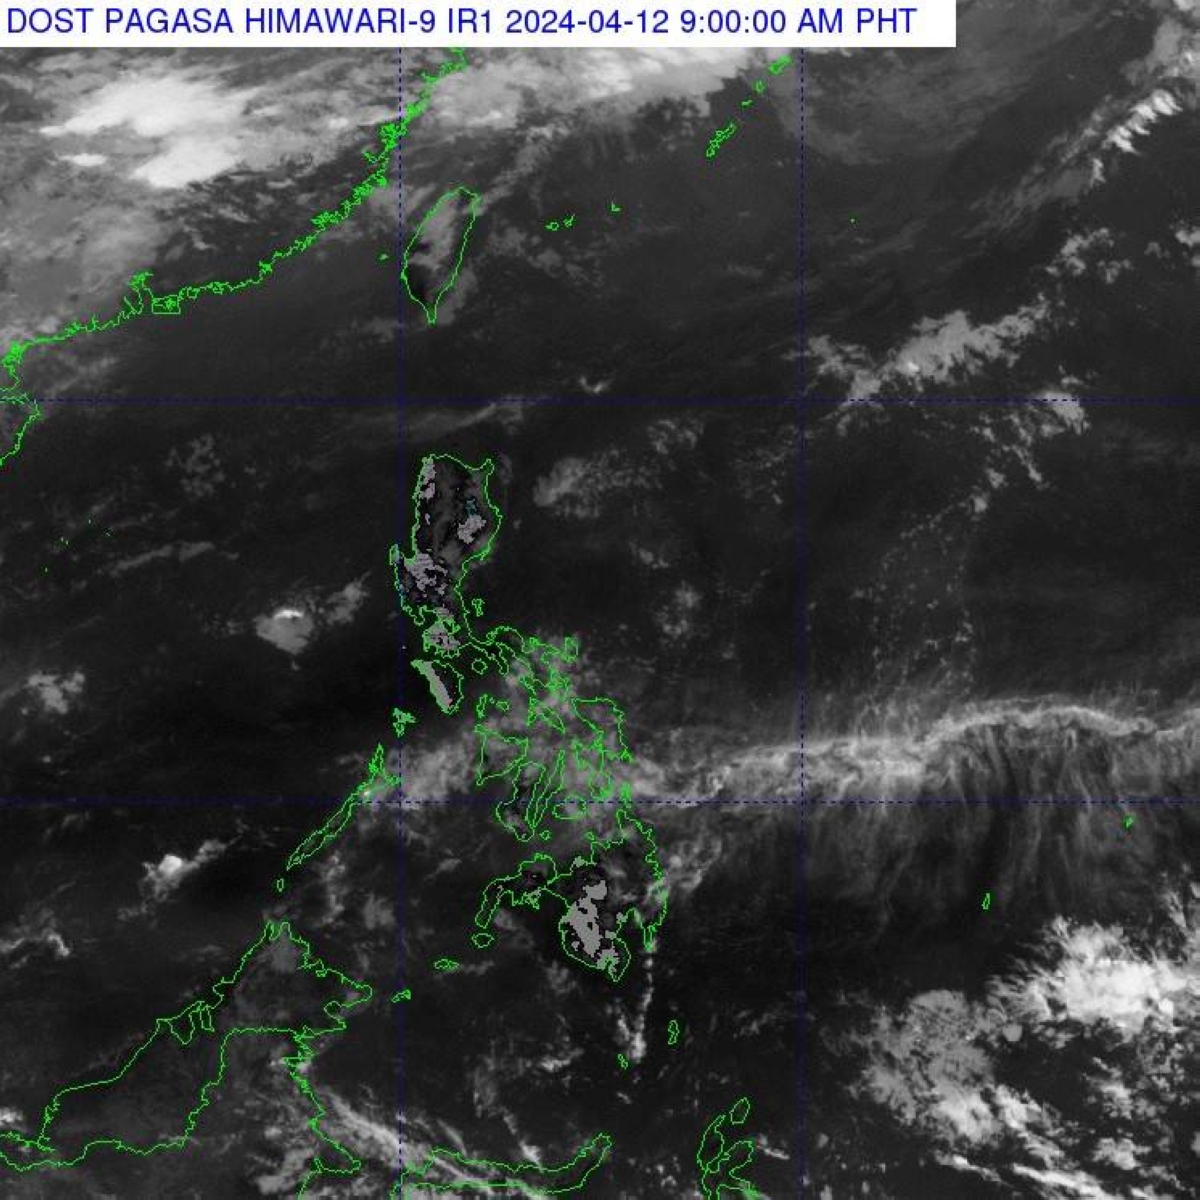 warm with isolated rain showers, says pagasa of friday's weather